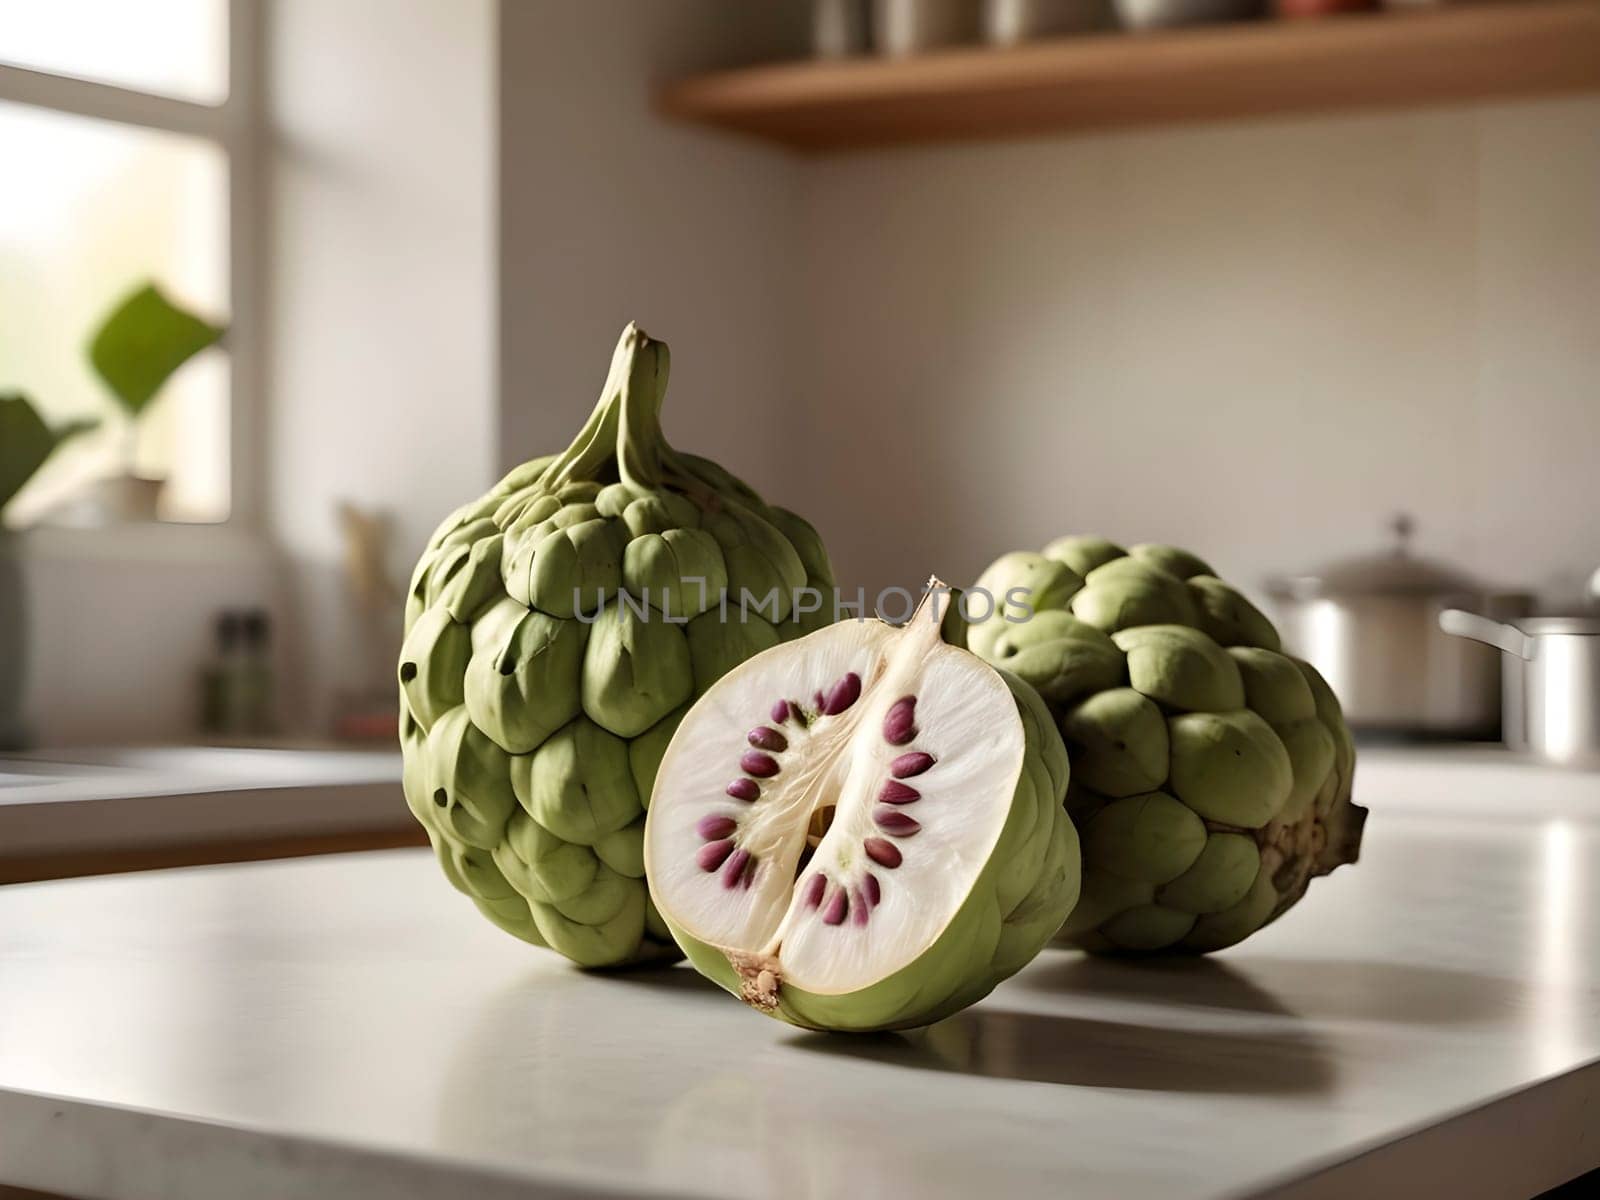 Sunlit Serenity. Cherimoya Centered in the Inviting Glow of a Cozy Kitchen by mailos